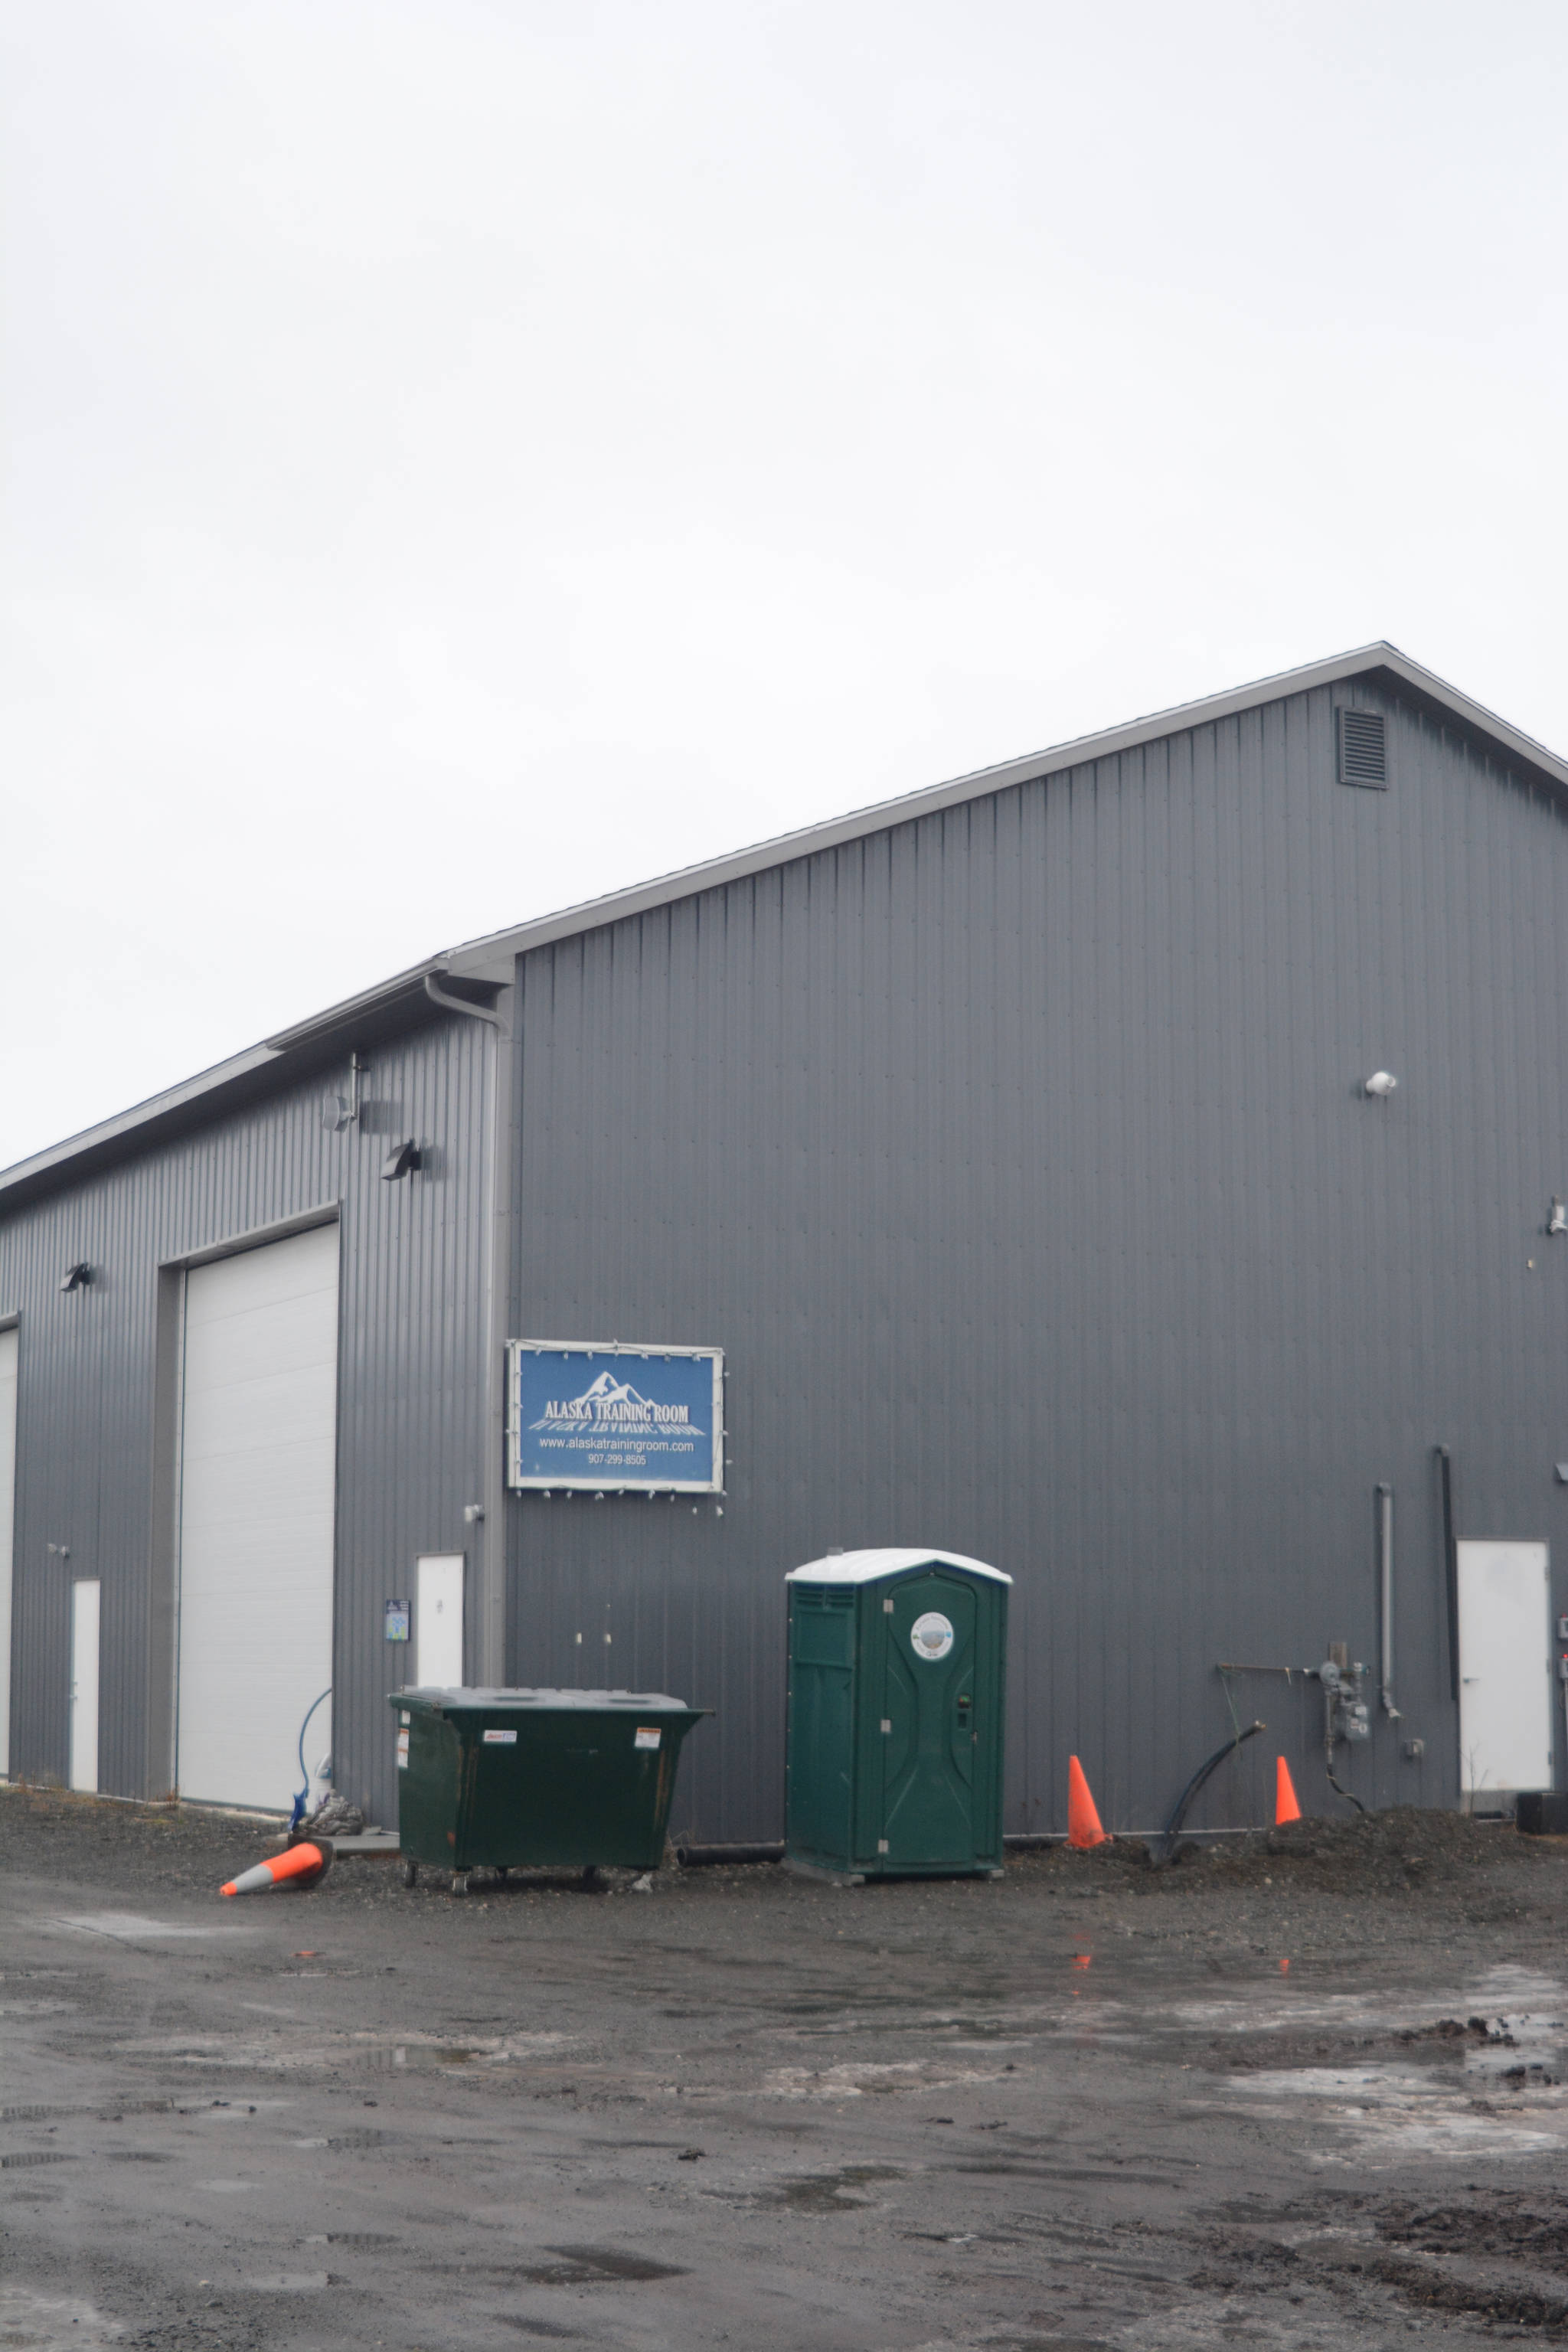 Alaska Loven It plans to operate a marijuana standard cultivation facility in this 5,000-square-foot building, shown in this Tuesday, Jan. 16, 2018 photo, on Kachemak Drive near the east end of the Homer Airport runway. Alaska Training Room currently uses the front of the building, but owner Mary Jo Campbell said she plans to move this month to a new location on Ocean Drive. (Photo by Michael Armstrong/Homer News).